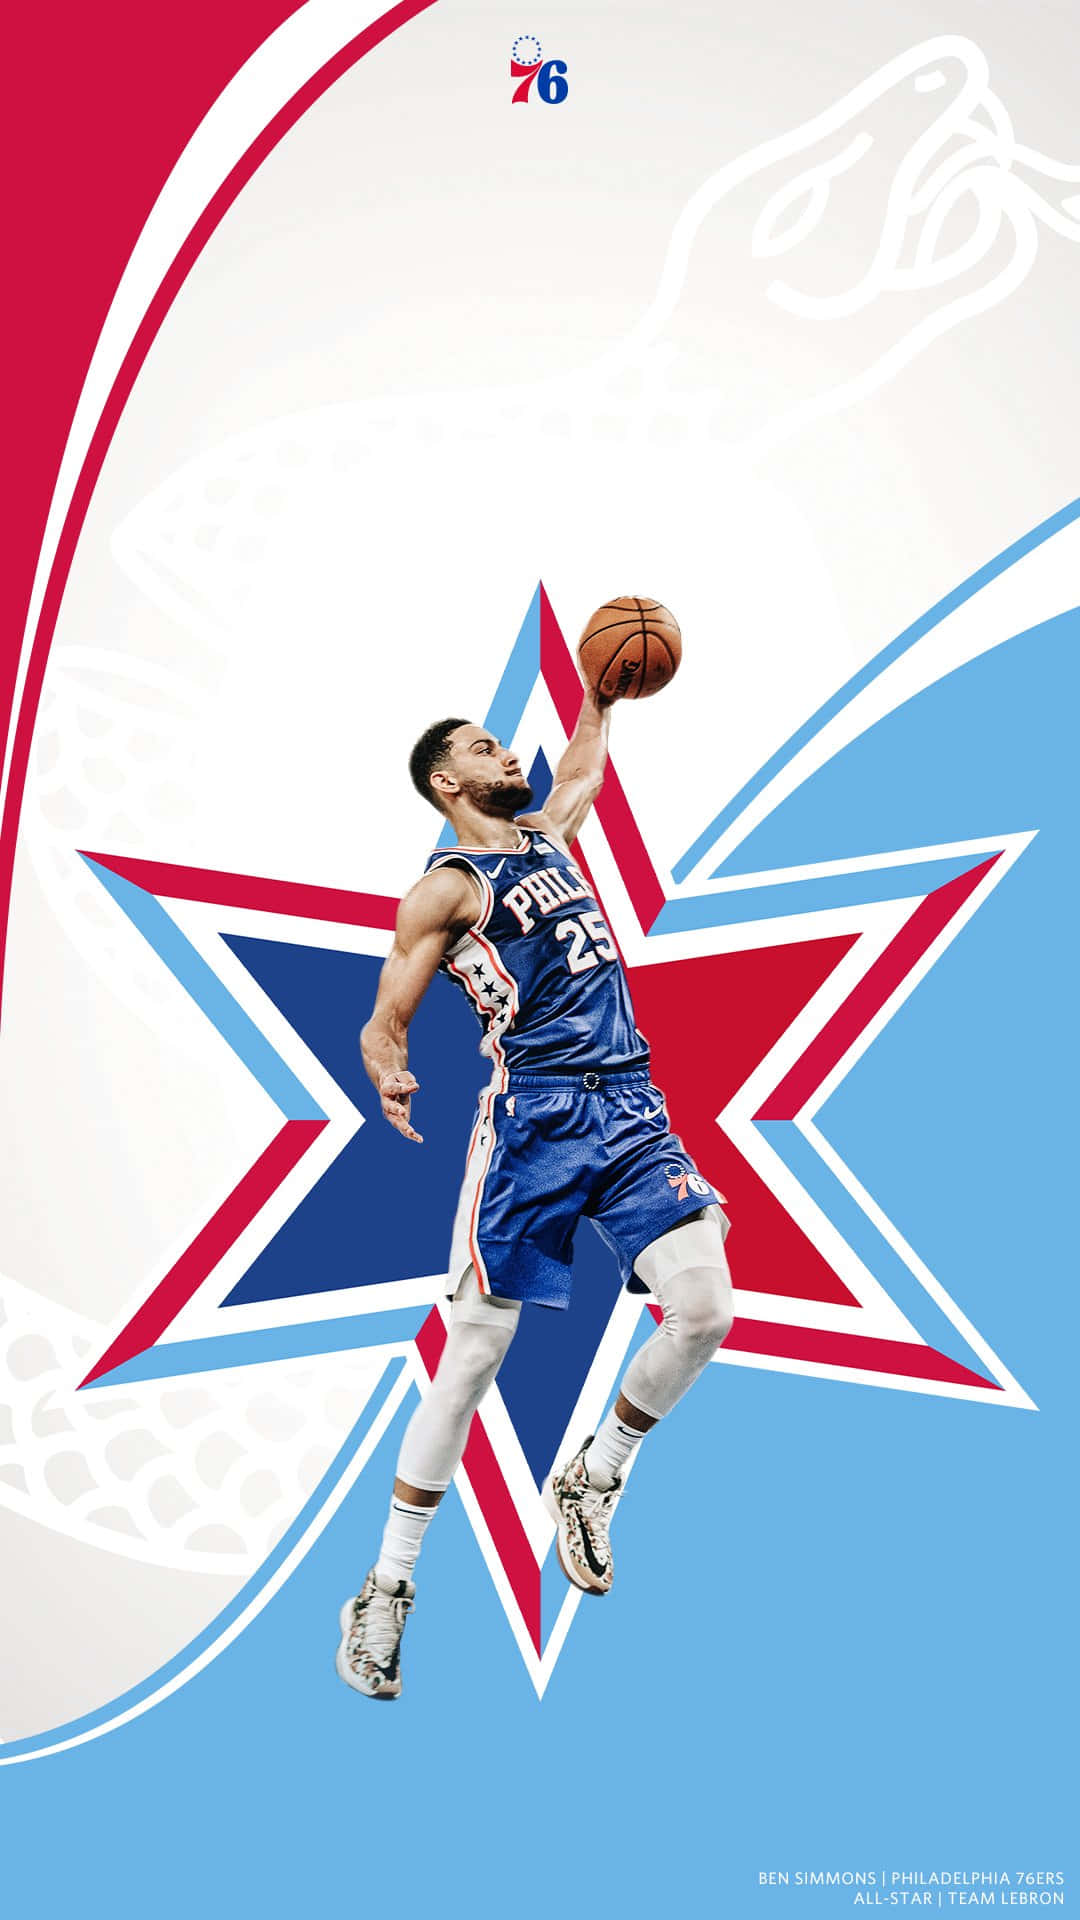 Get the Philadelphia 76ers logo on your Iphone! Wallpaper